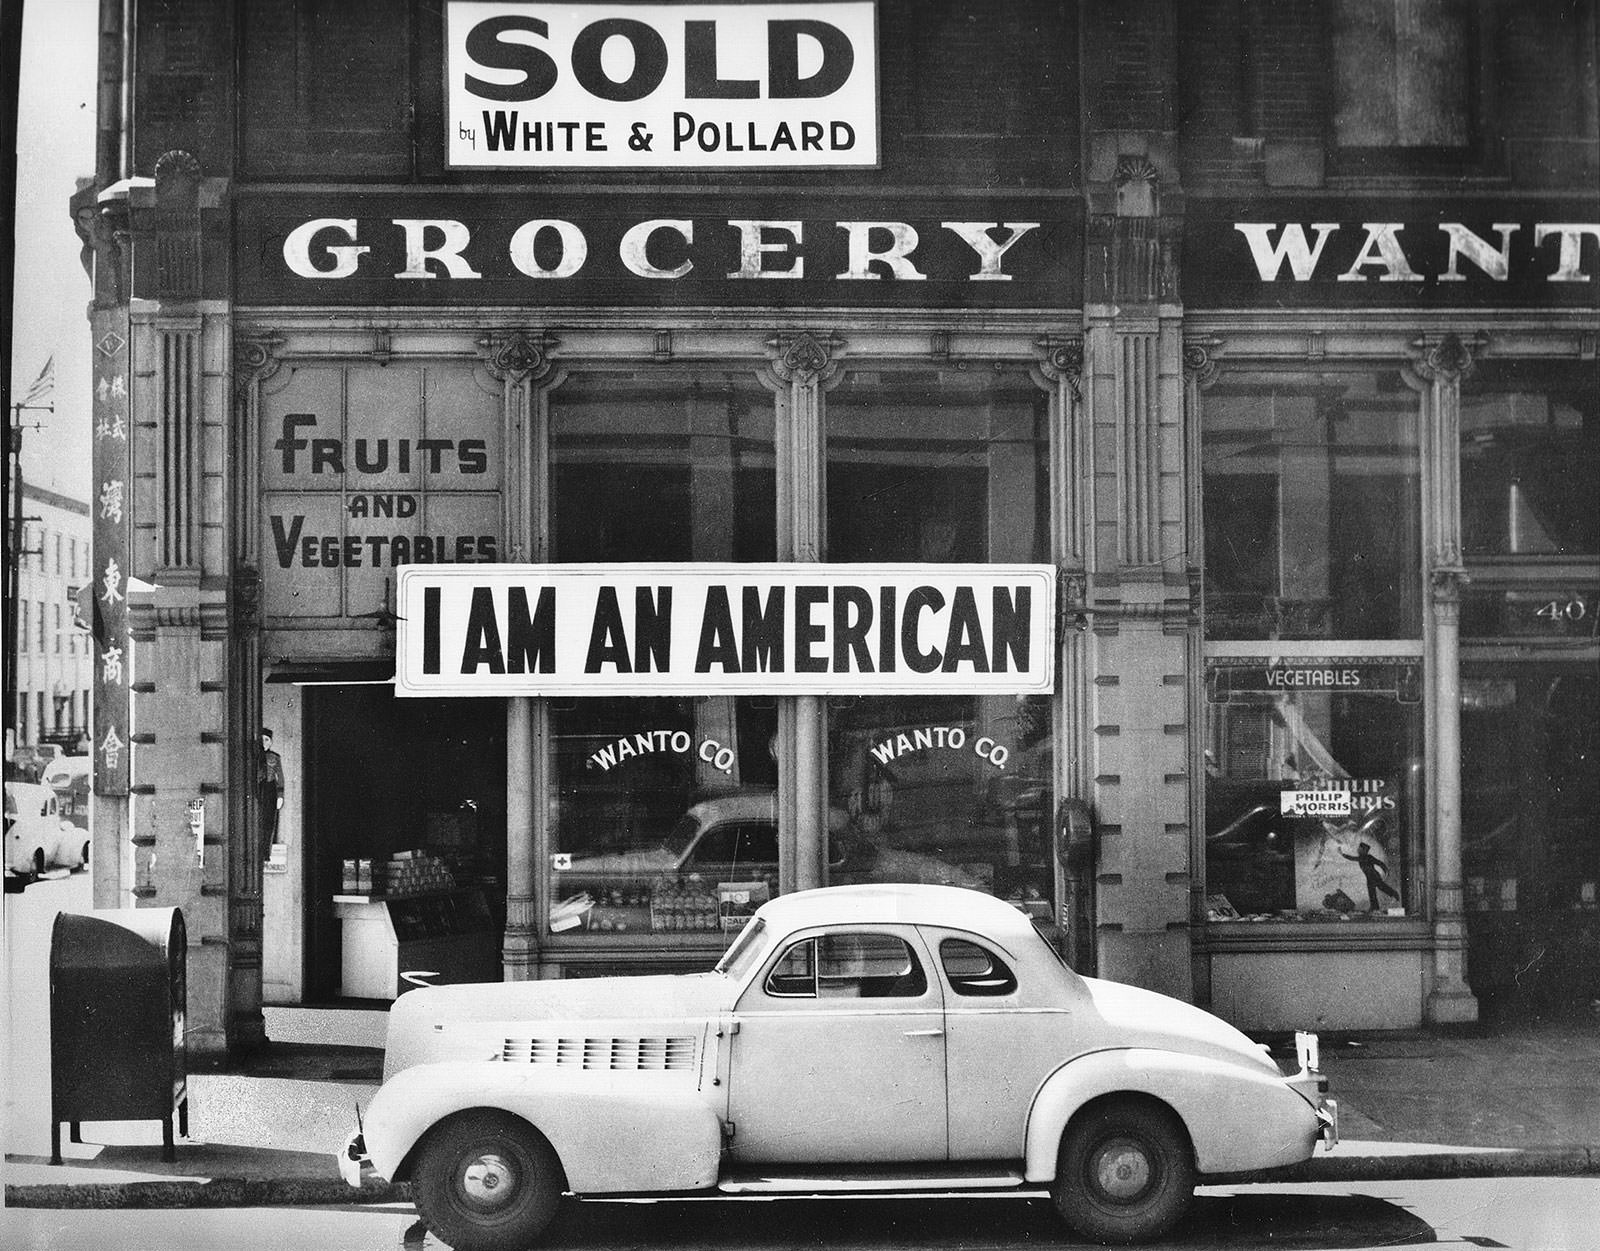 A store owner's response to anti-Japanese sentiment in the wake of the Pearl Harbor attack, Oakland, California, 1942